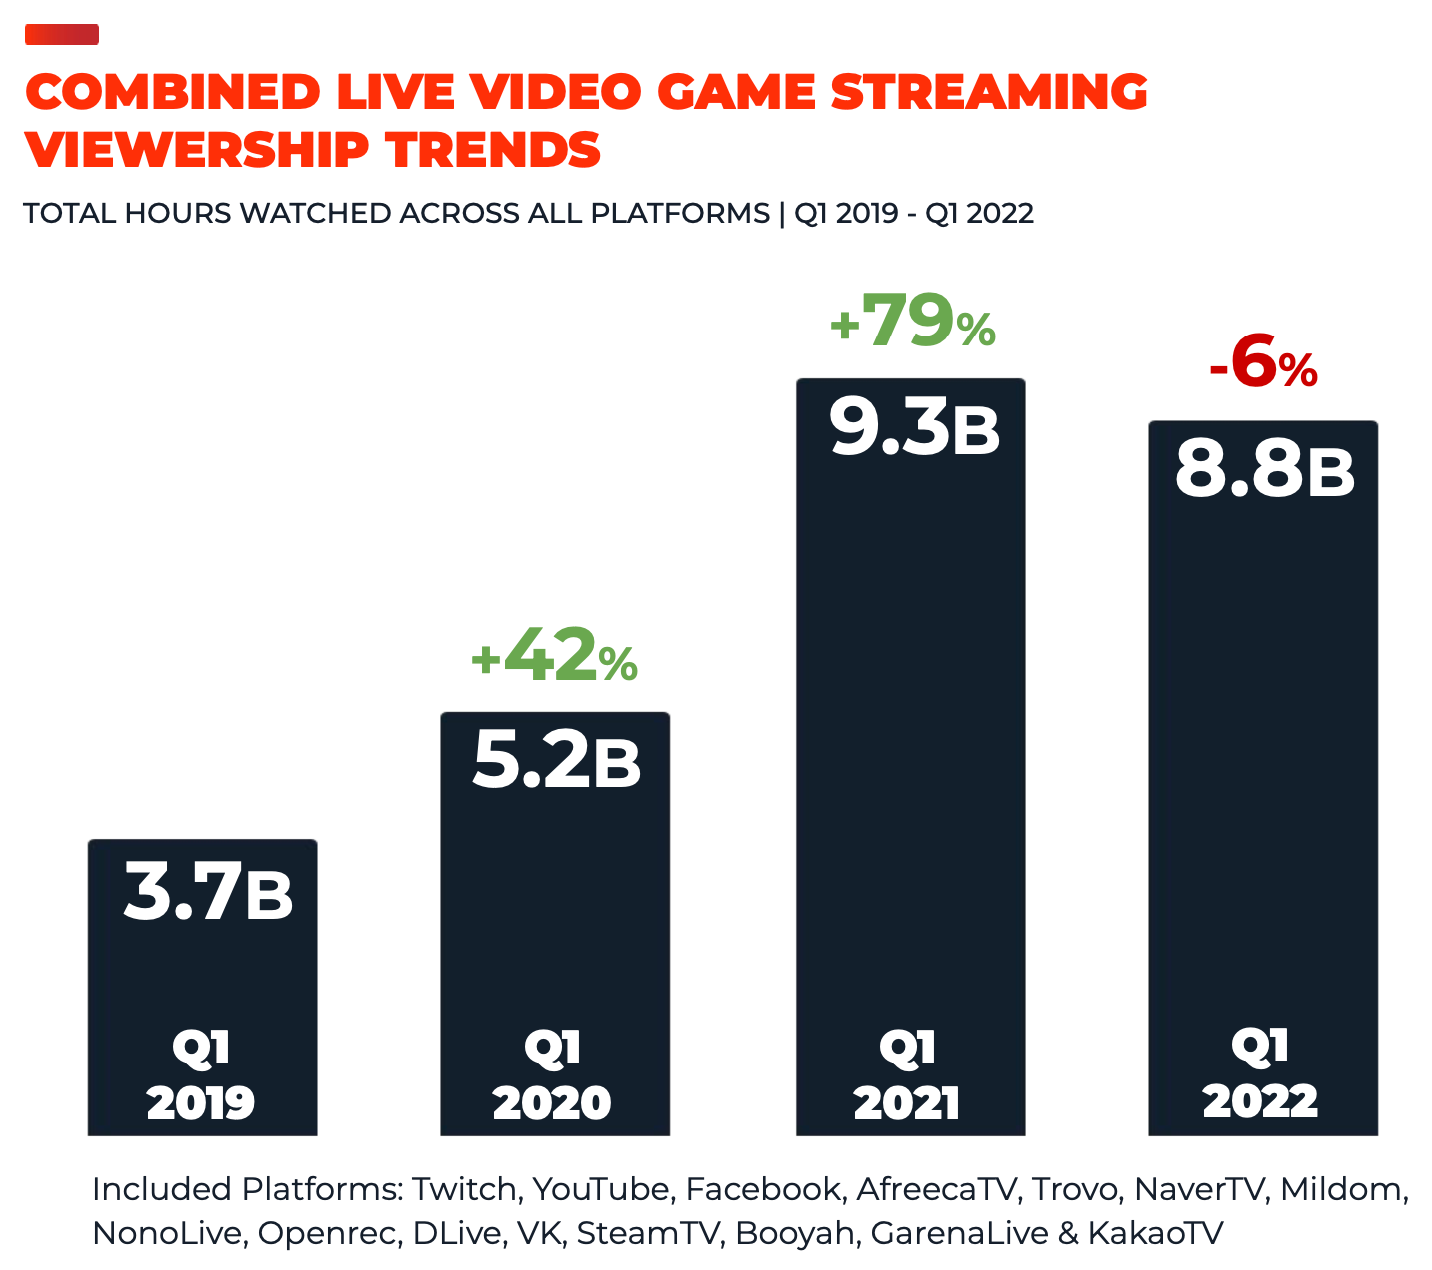 Live video game streaming